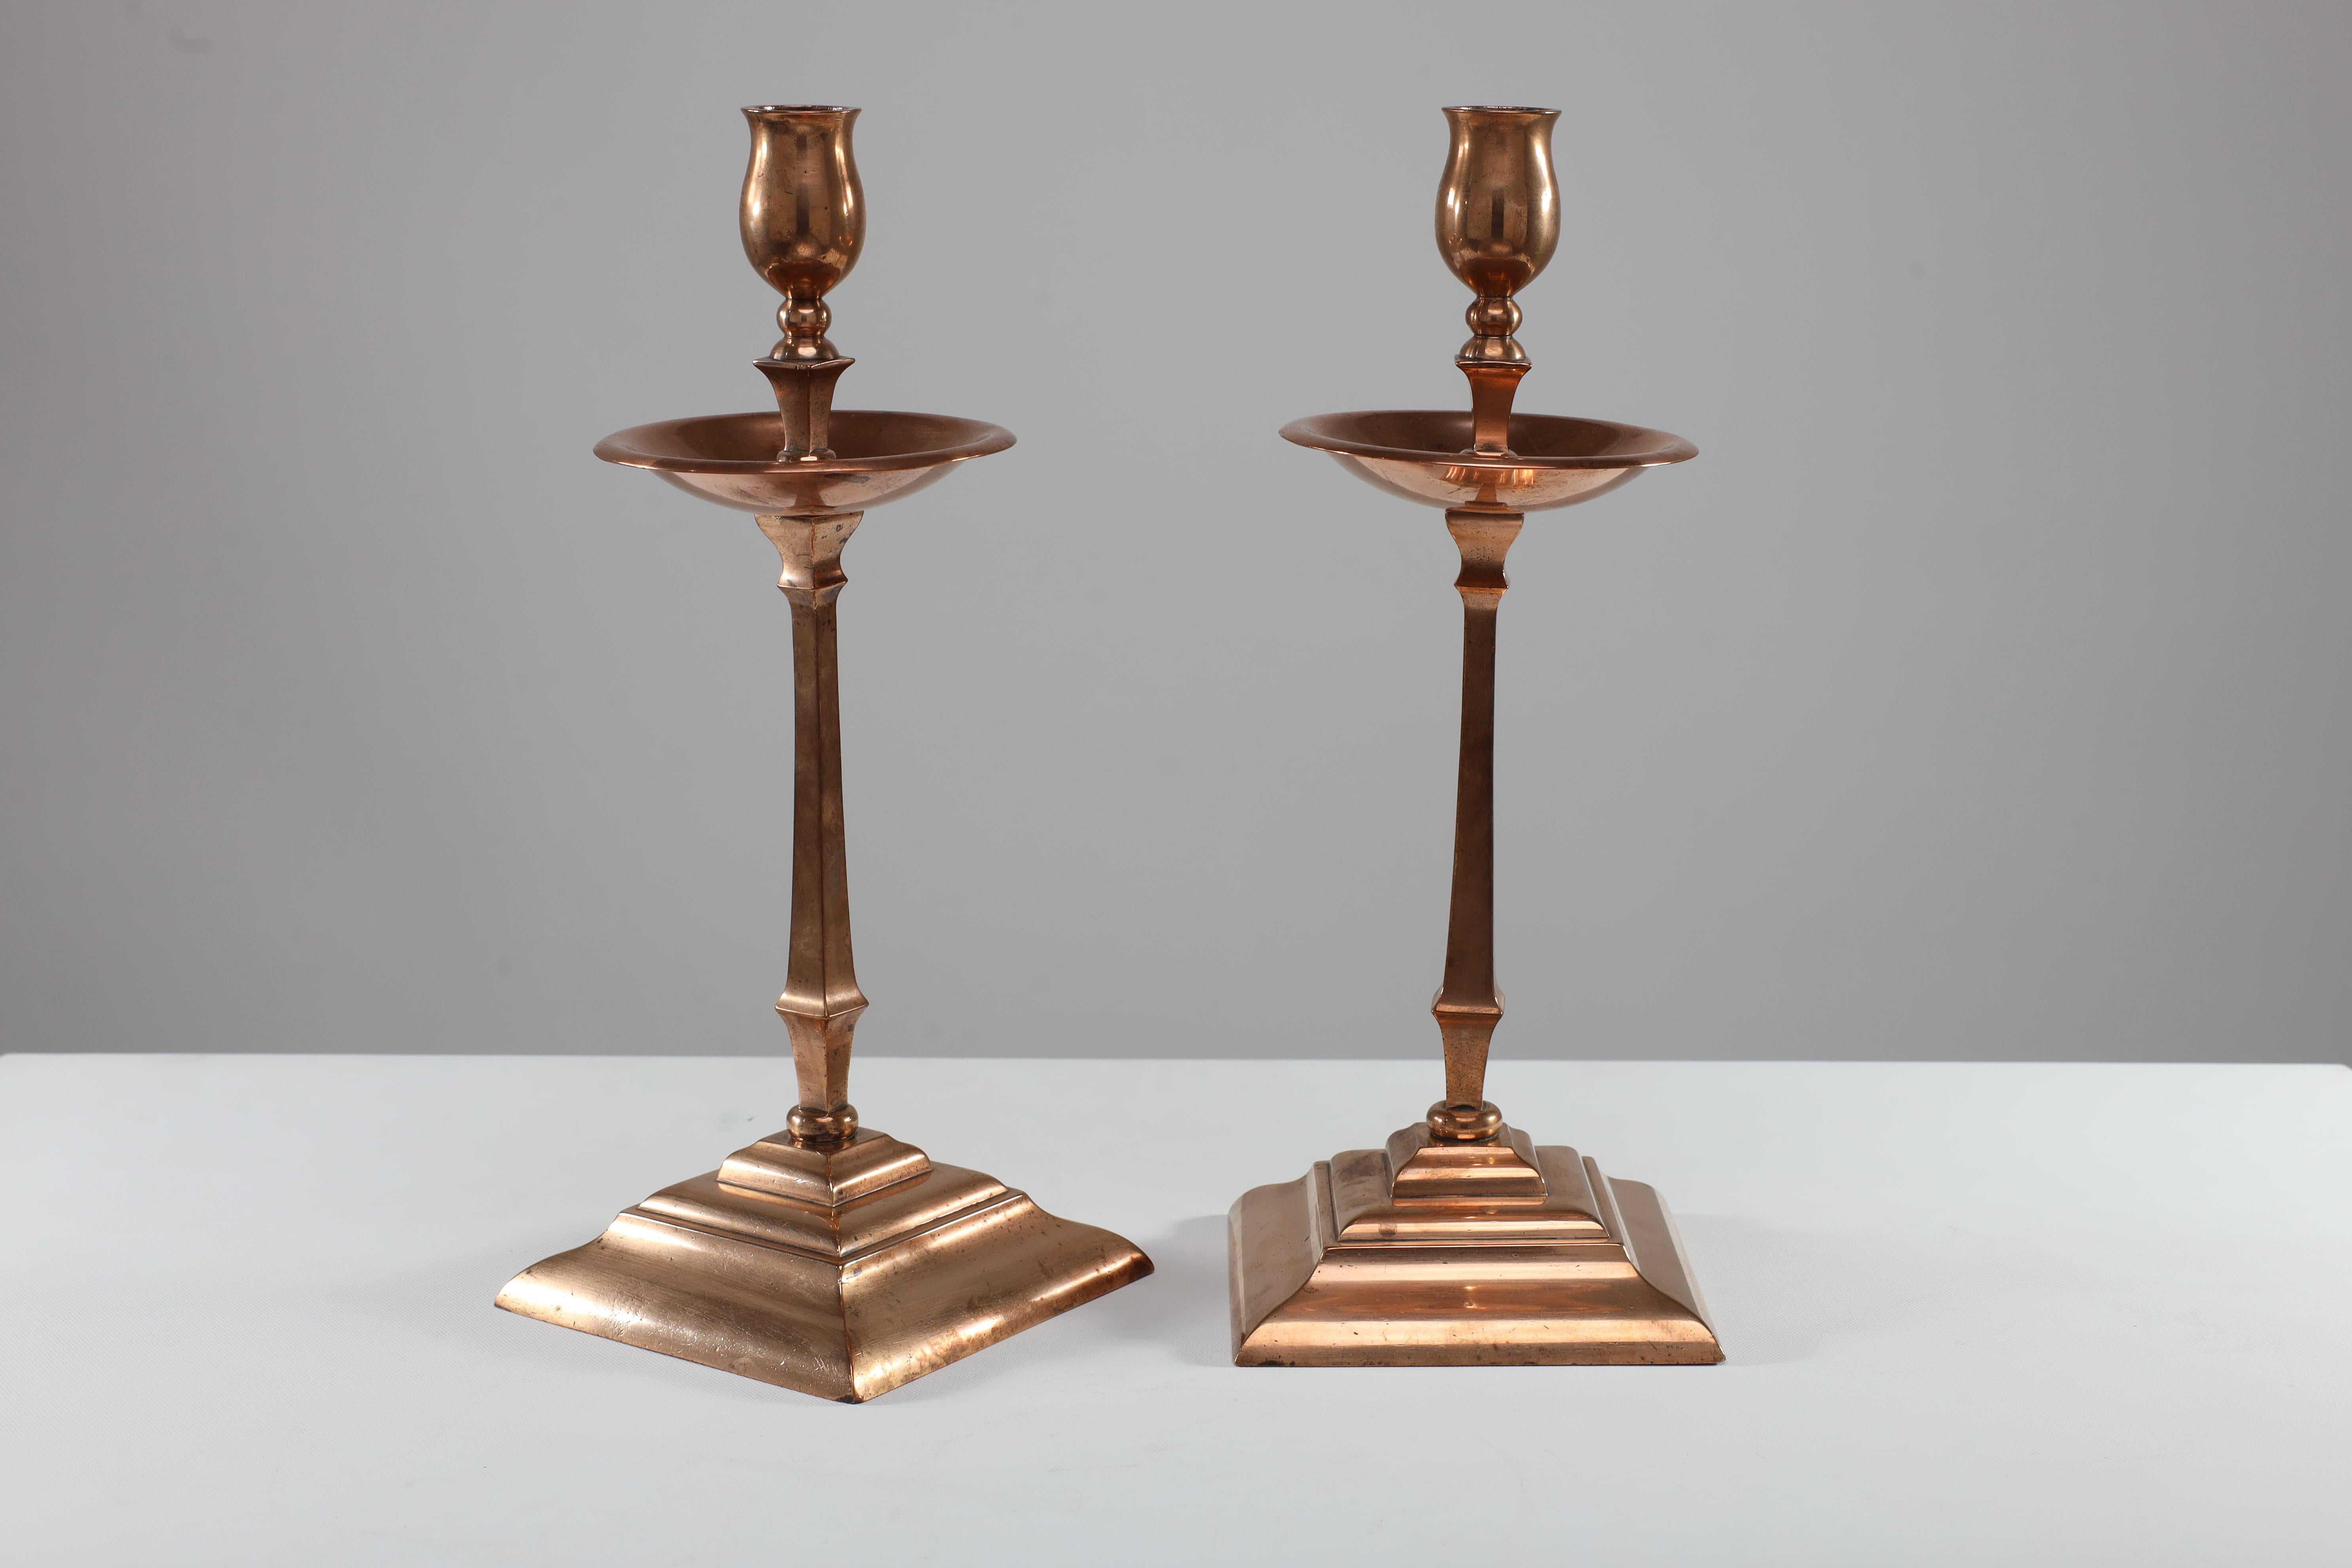 W A S Benson. A pair of Arts and Crafts copper and brass candlesticks. Price for the pair.